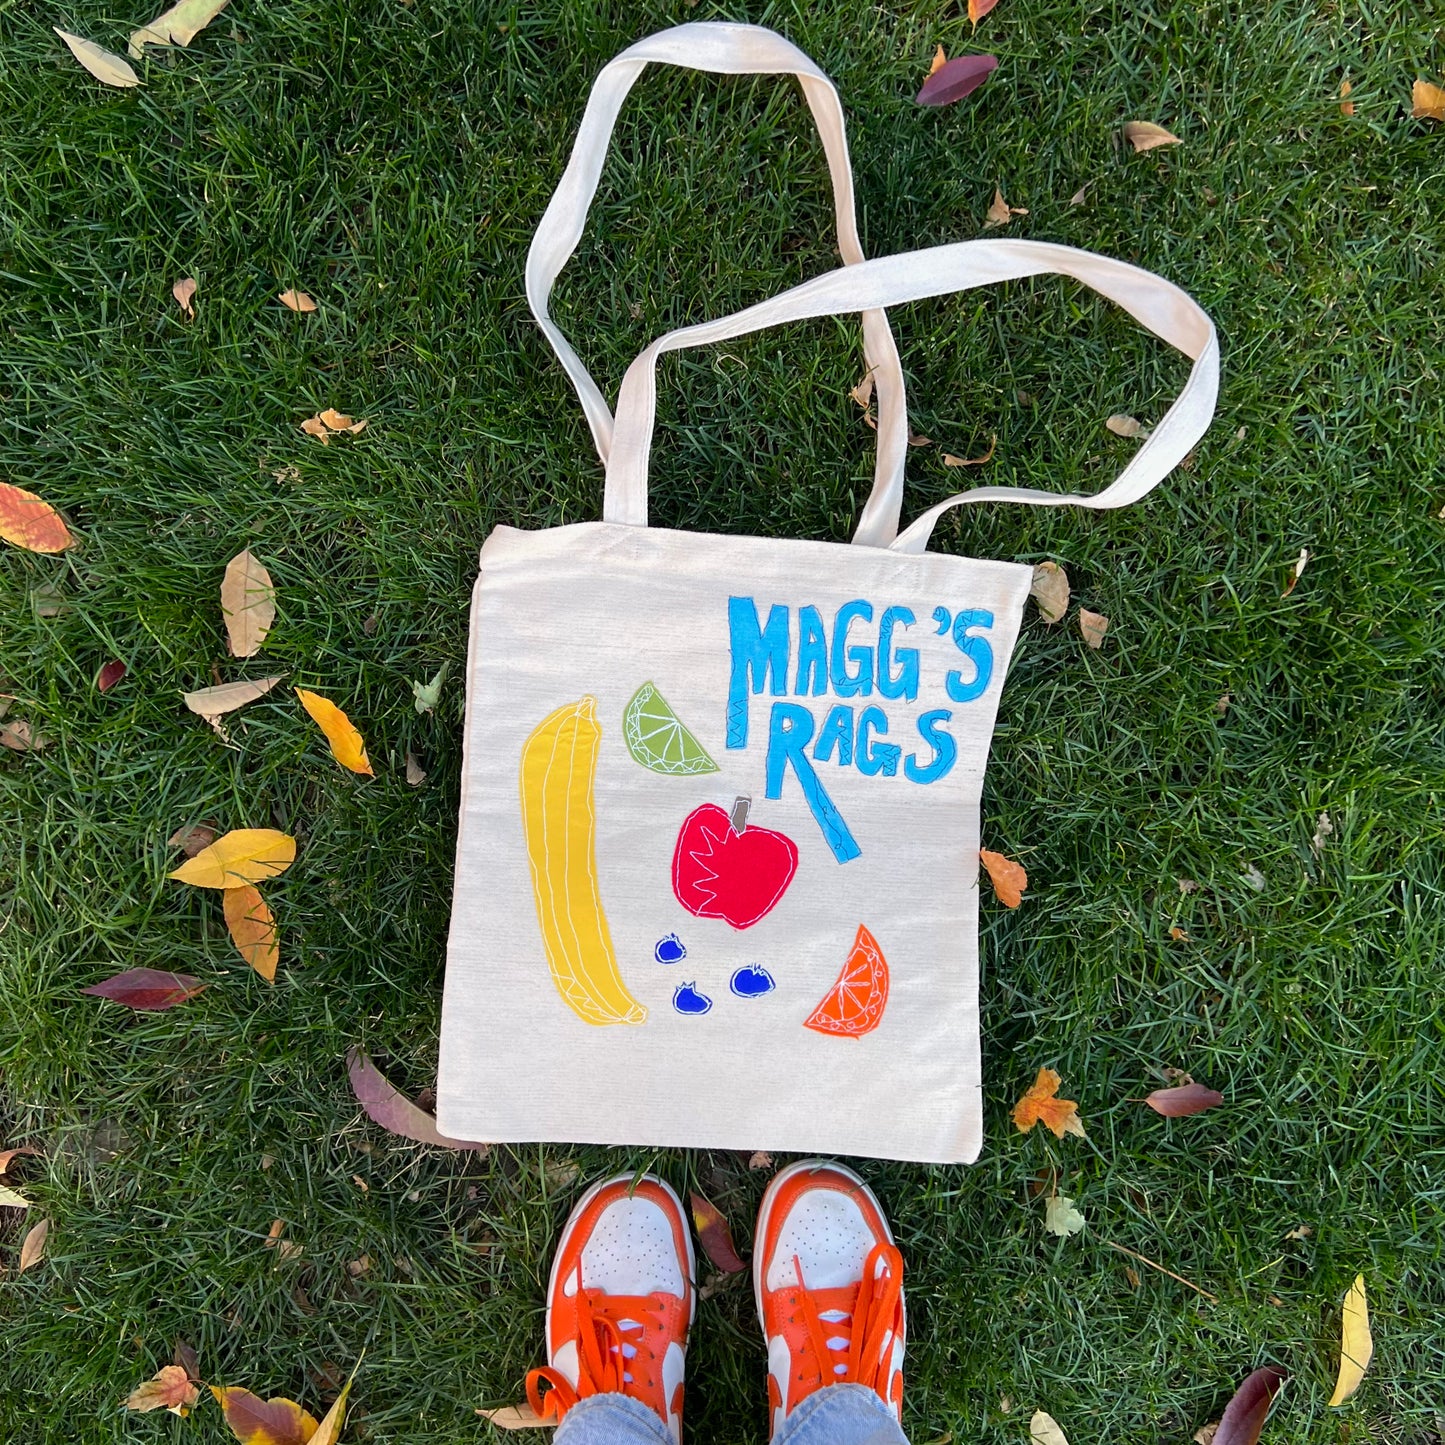 Magg’s Rags Fruit tote